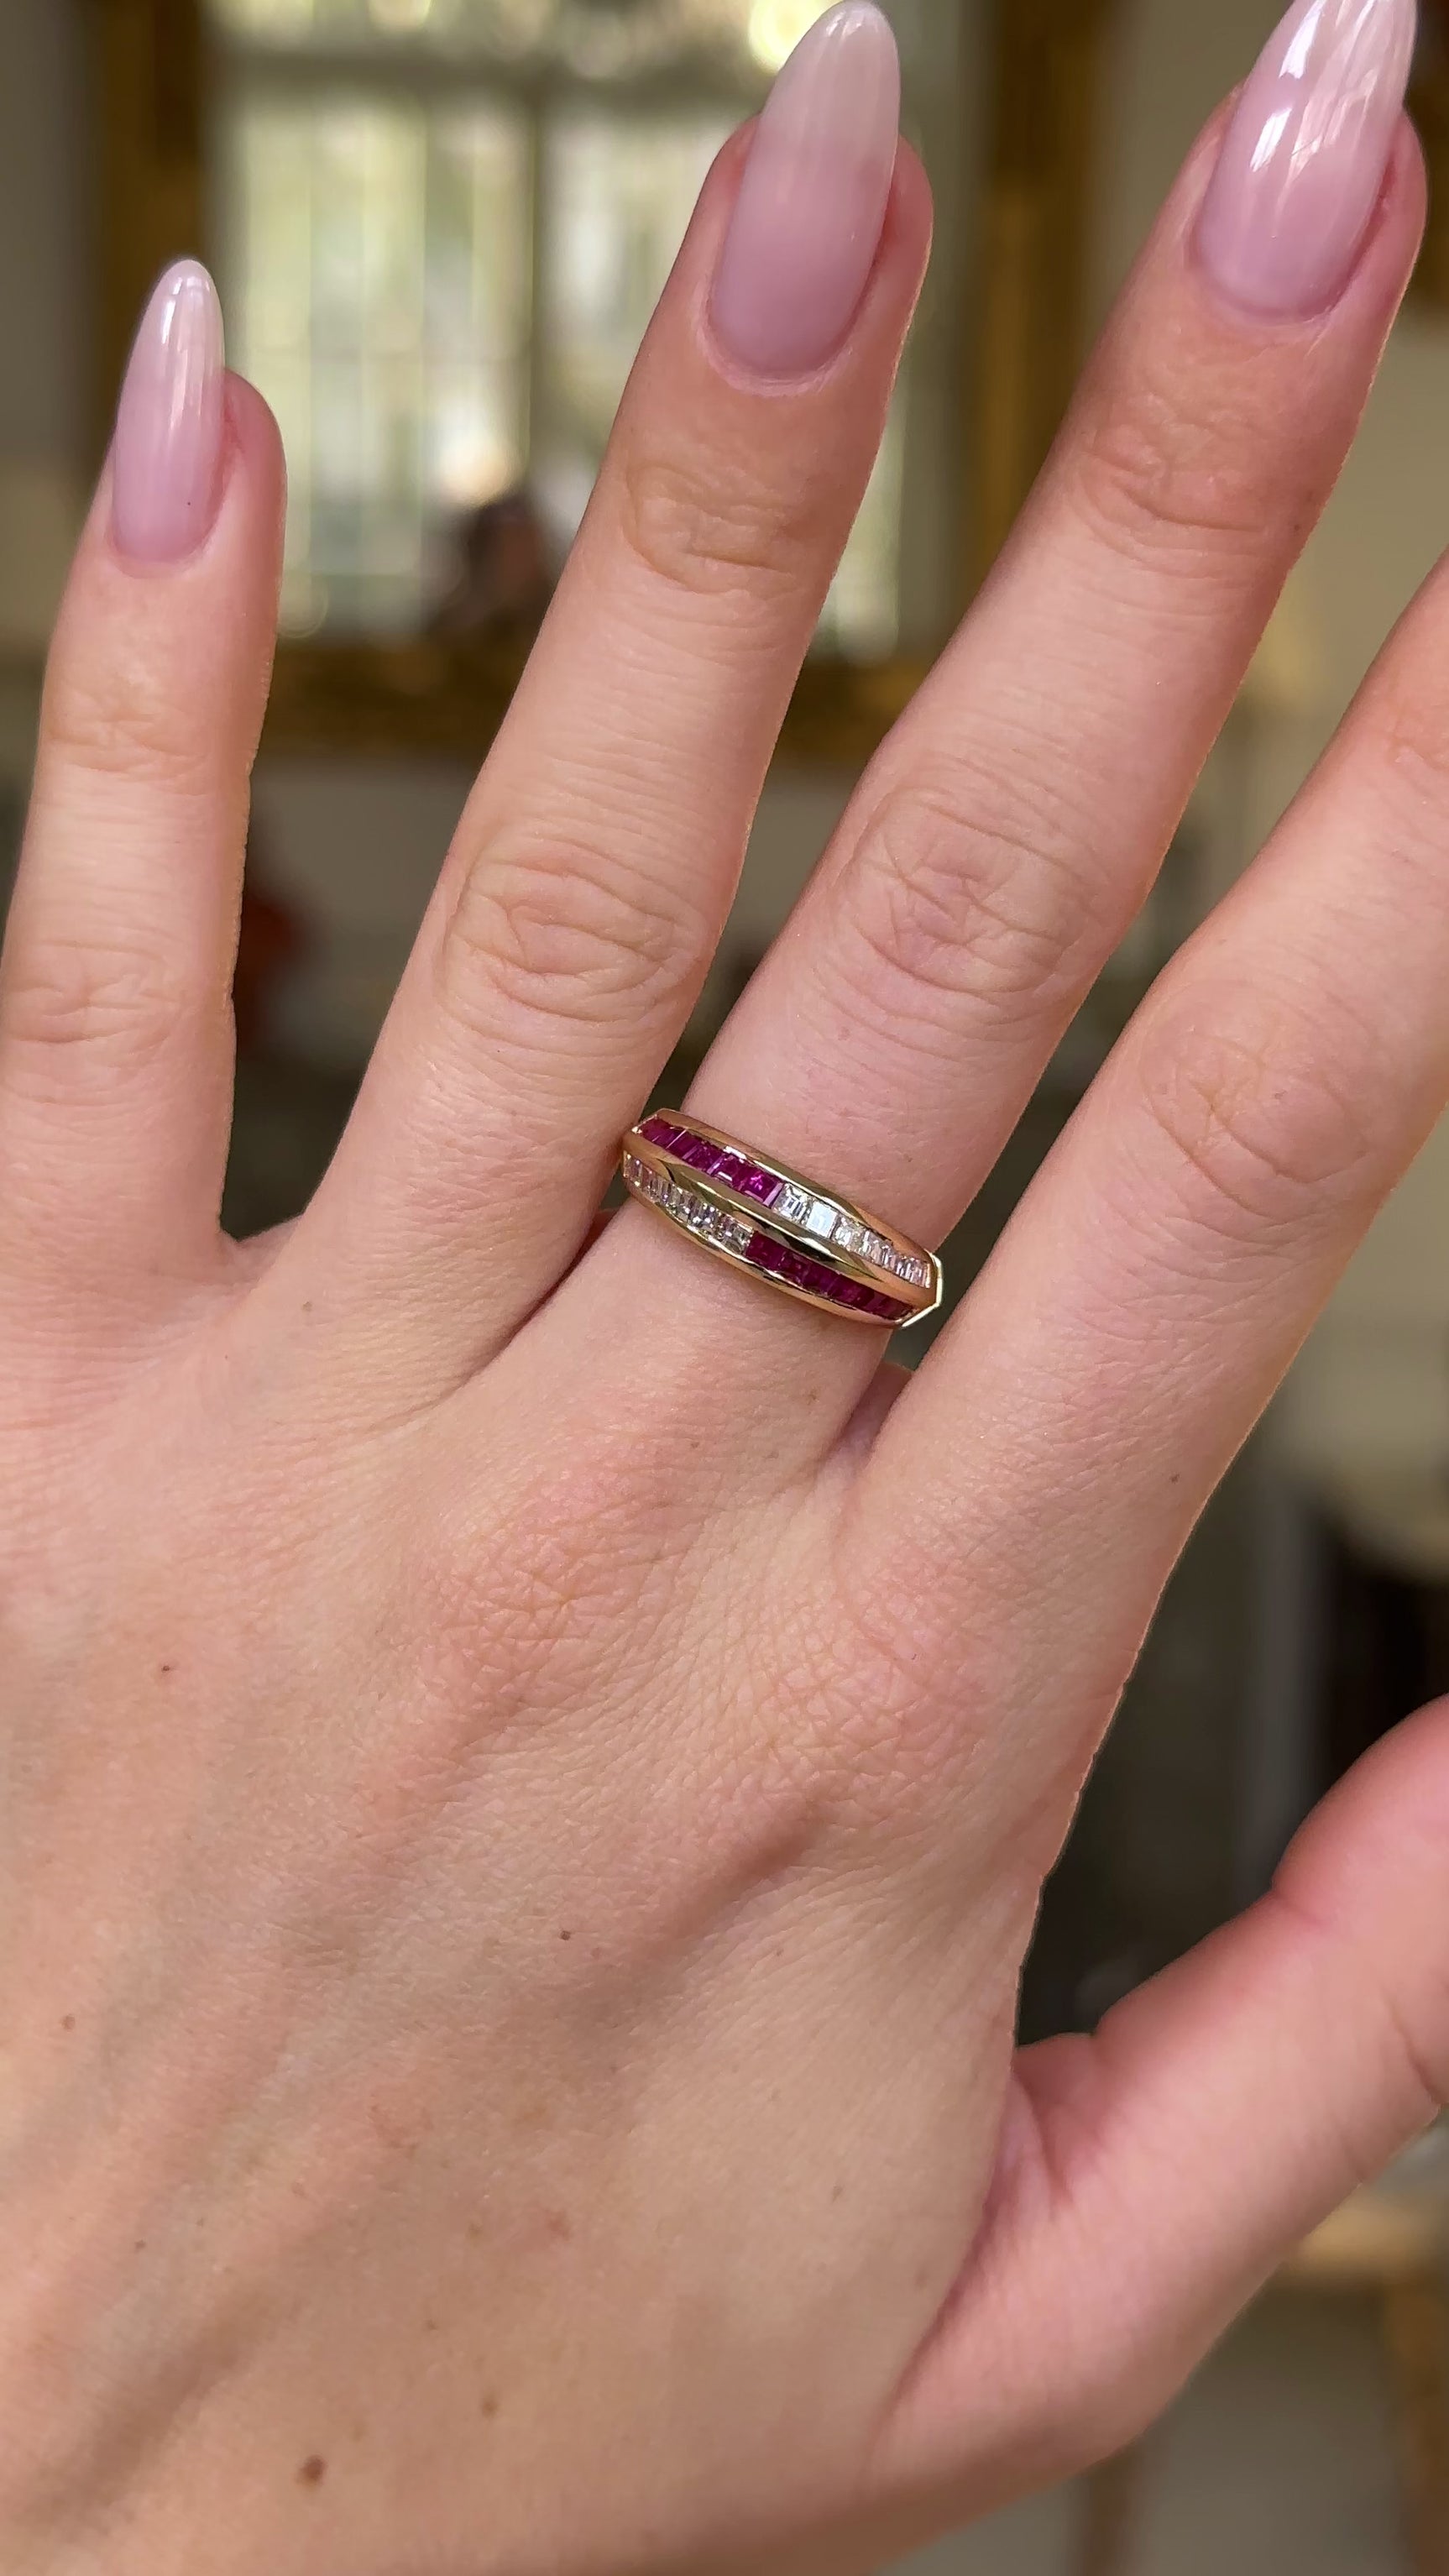 Ruby and diamond half eternity ring worn on hand and moved around to give perspective.